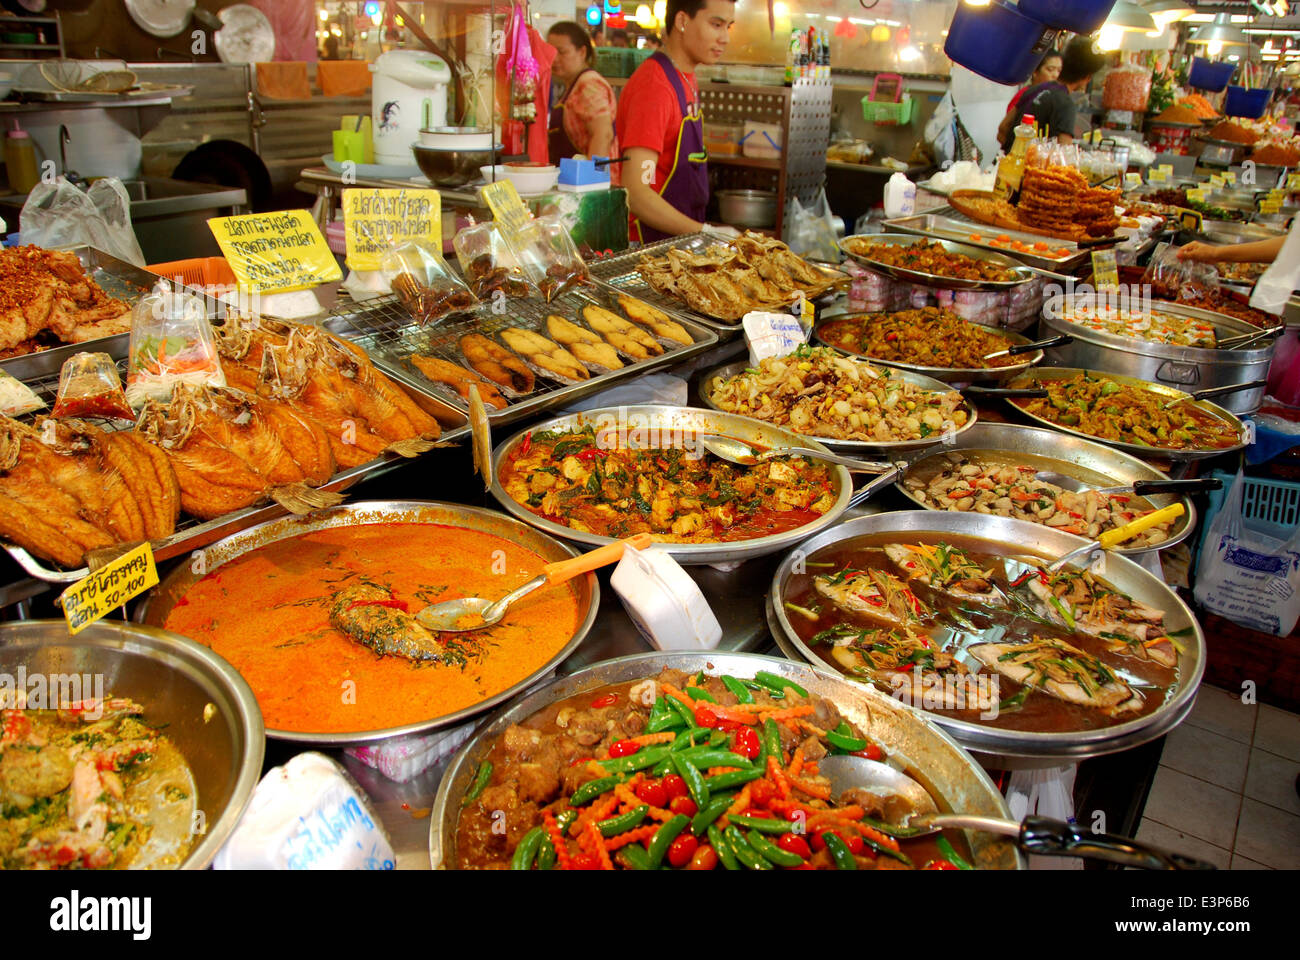 Bangkok Thailand Many Delicious Classic Thai Foods Can Be Purchased At The Expansive Or Tor Kor Market Stock Photo Alamy